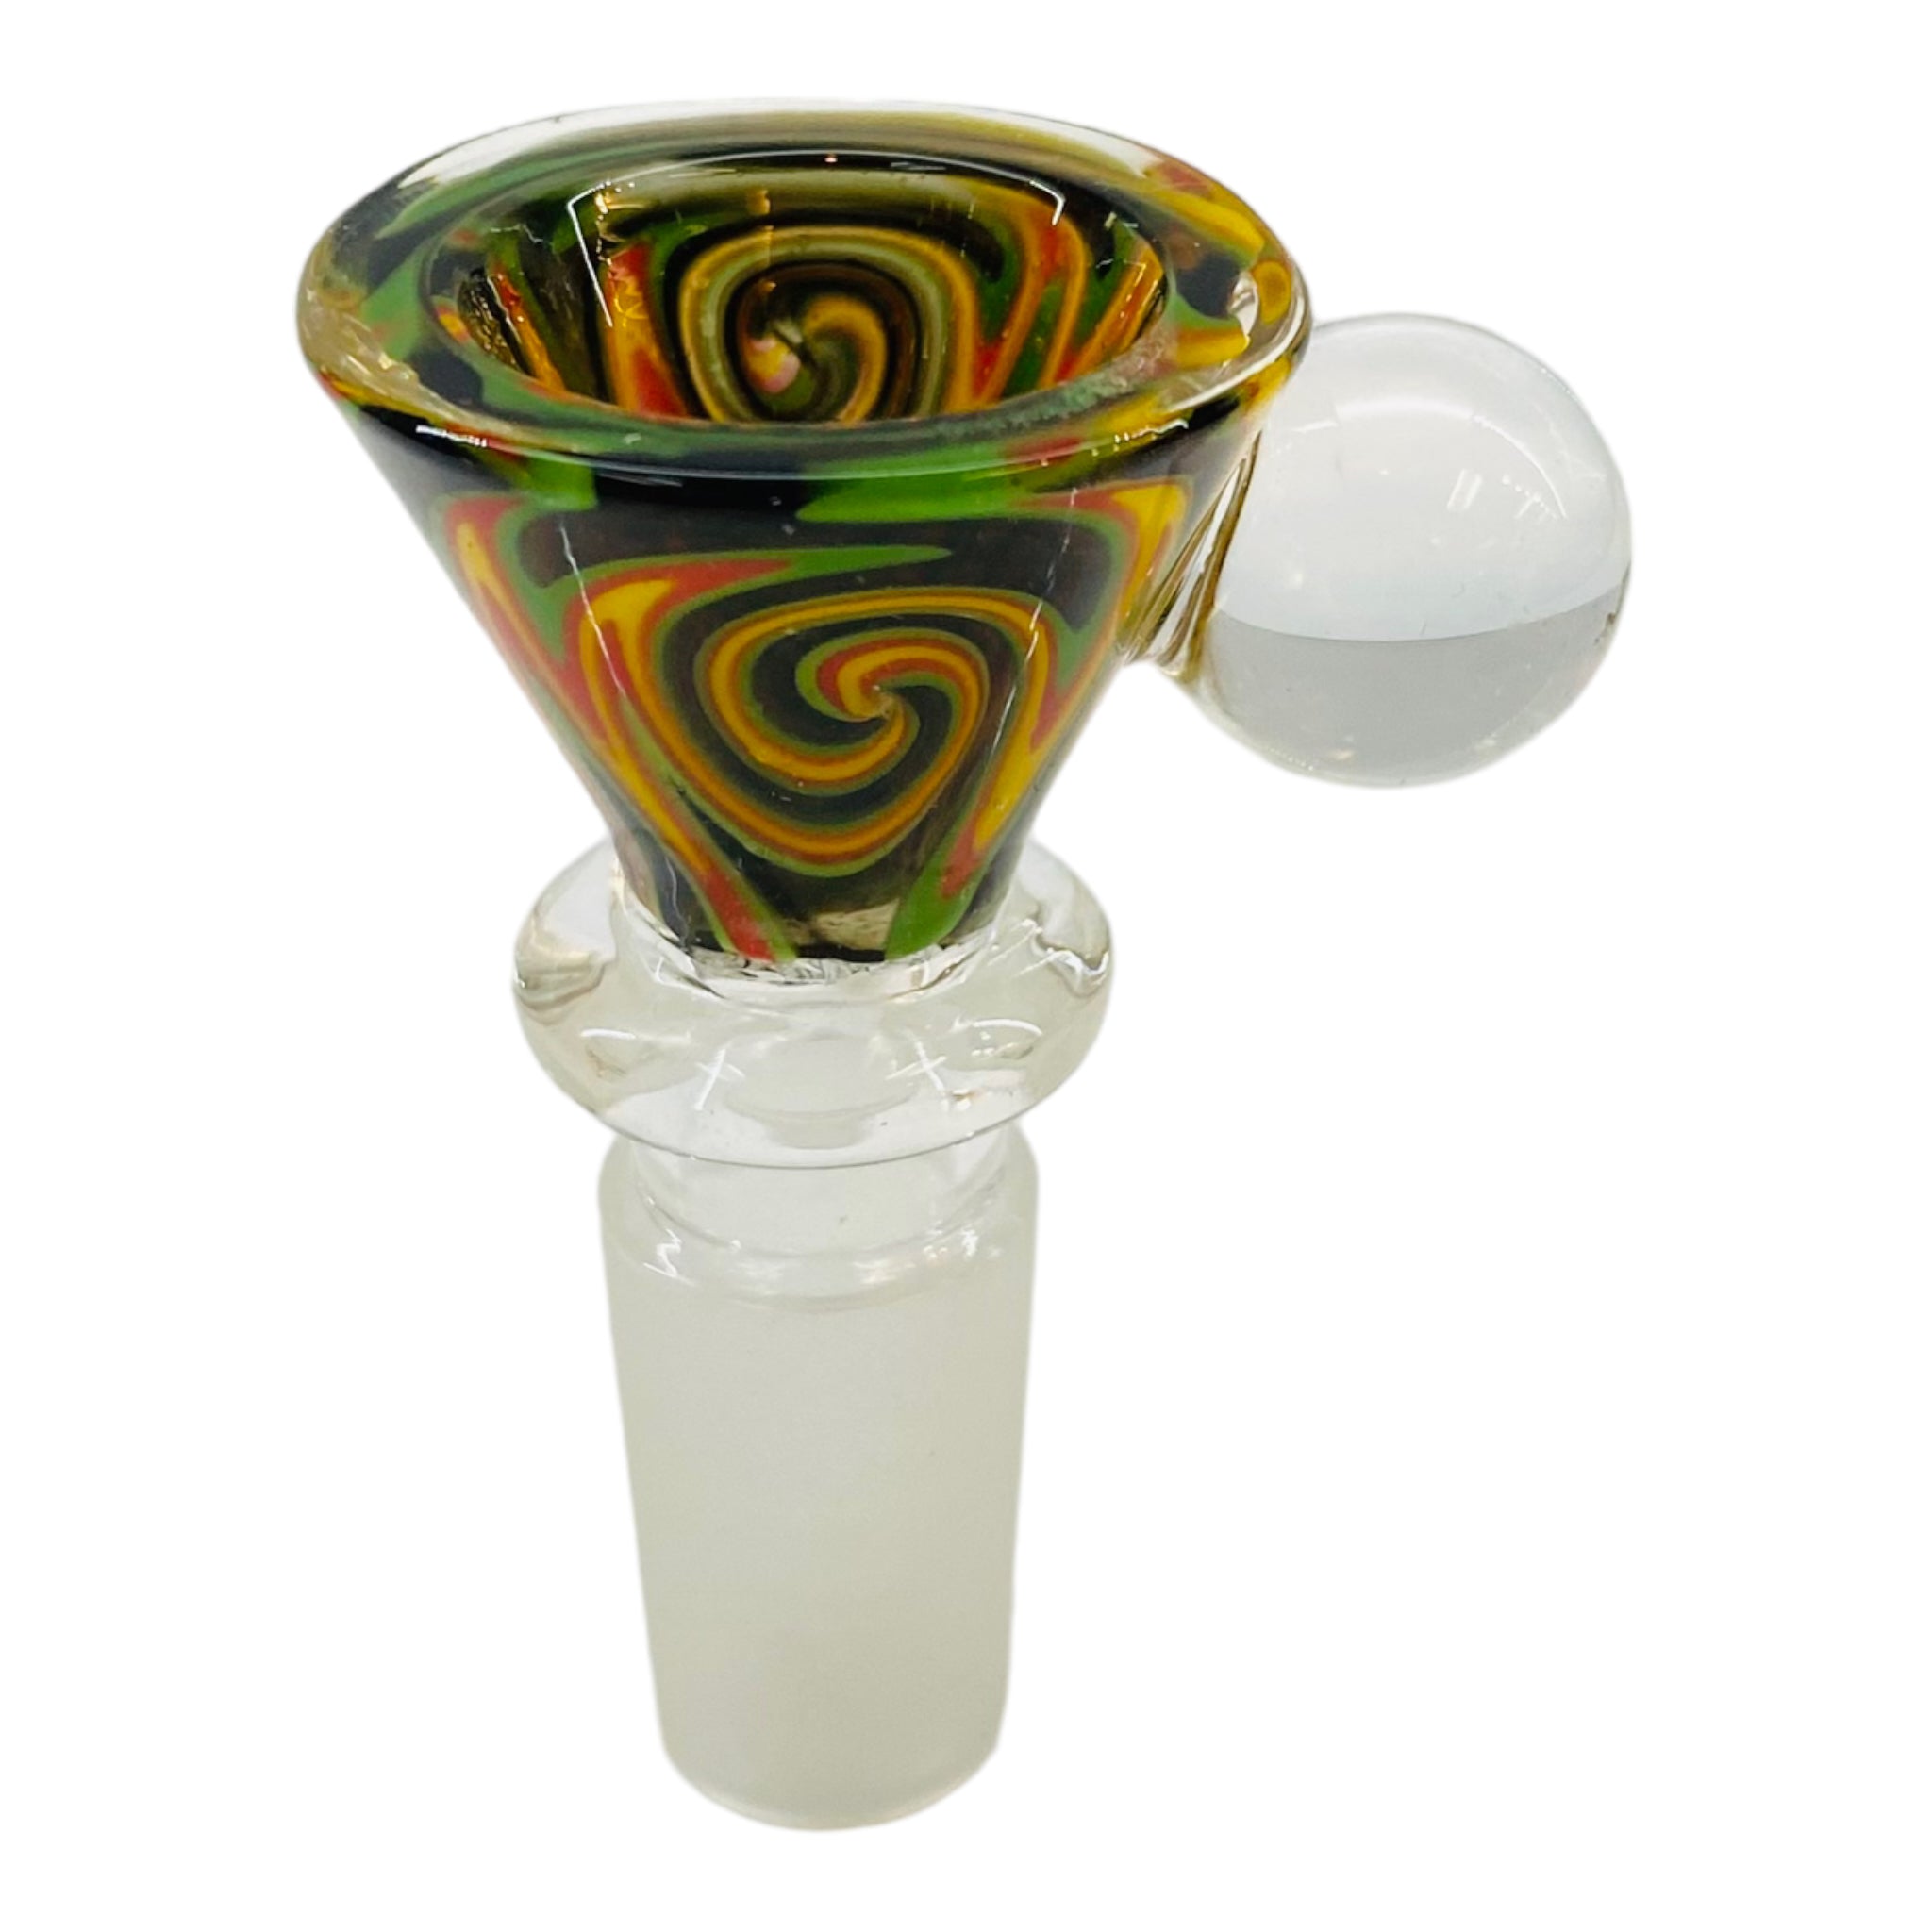 14mm Flower Bowl - Wig Wag Martini Bowl With Built In Honeycomb Screen - Rasta